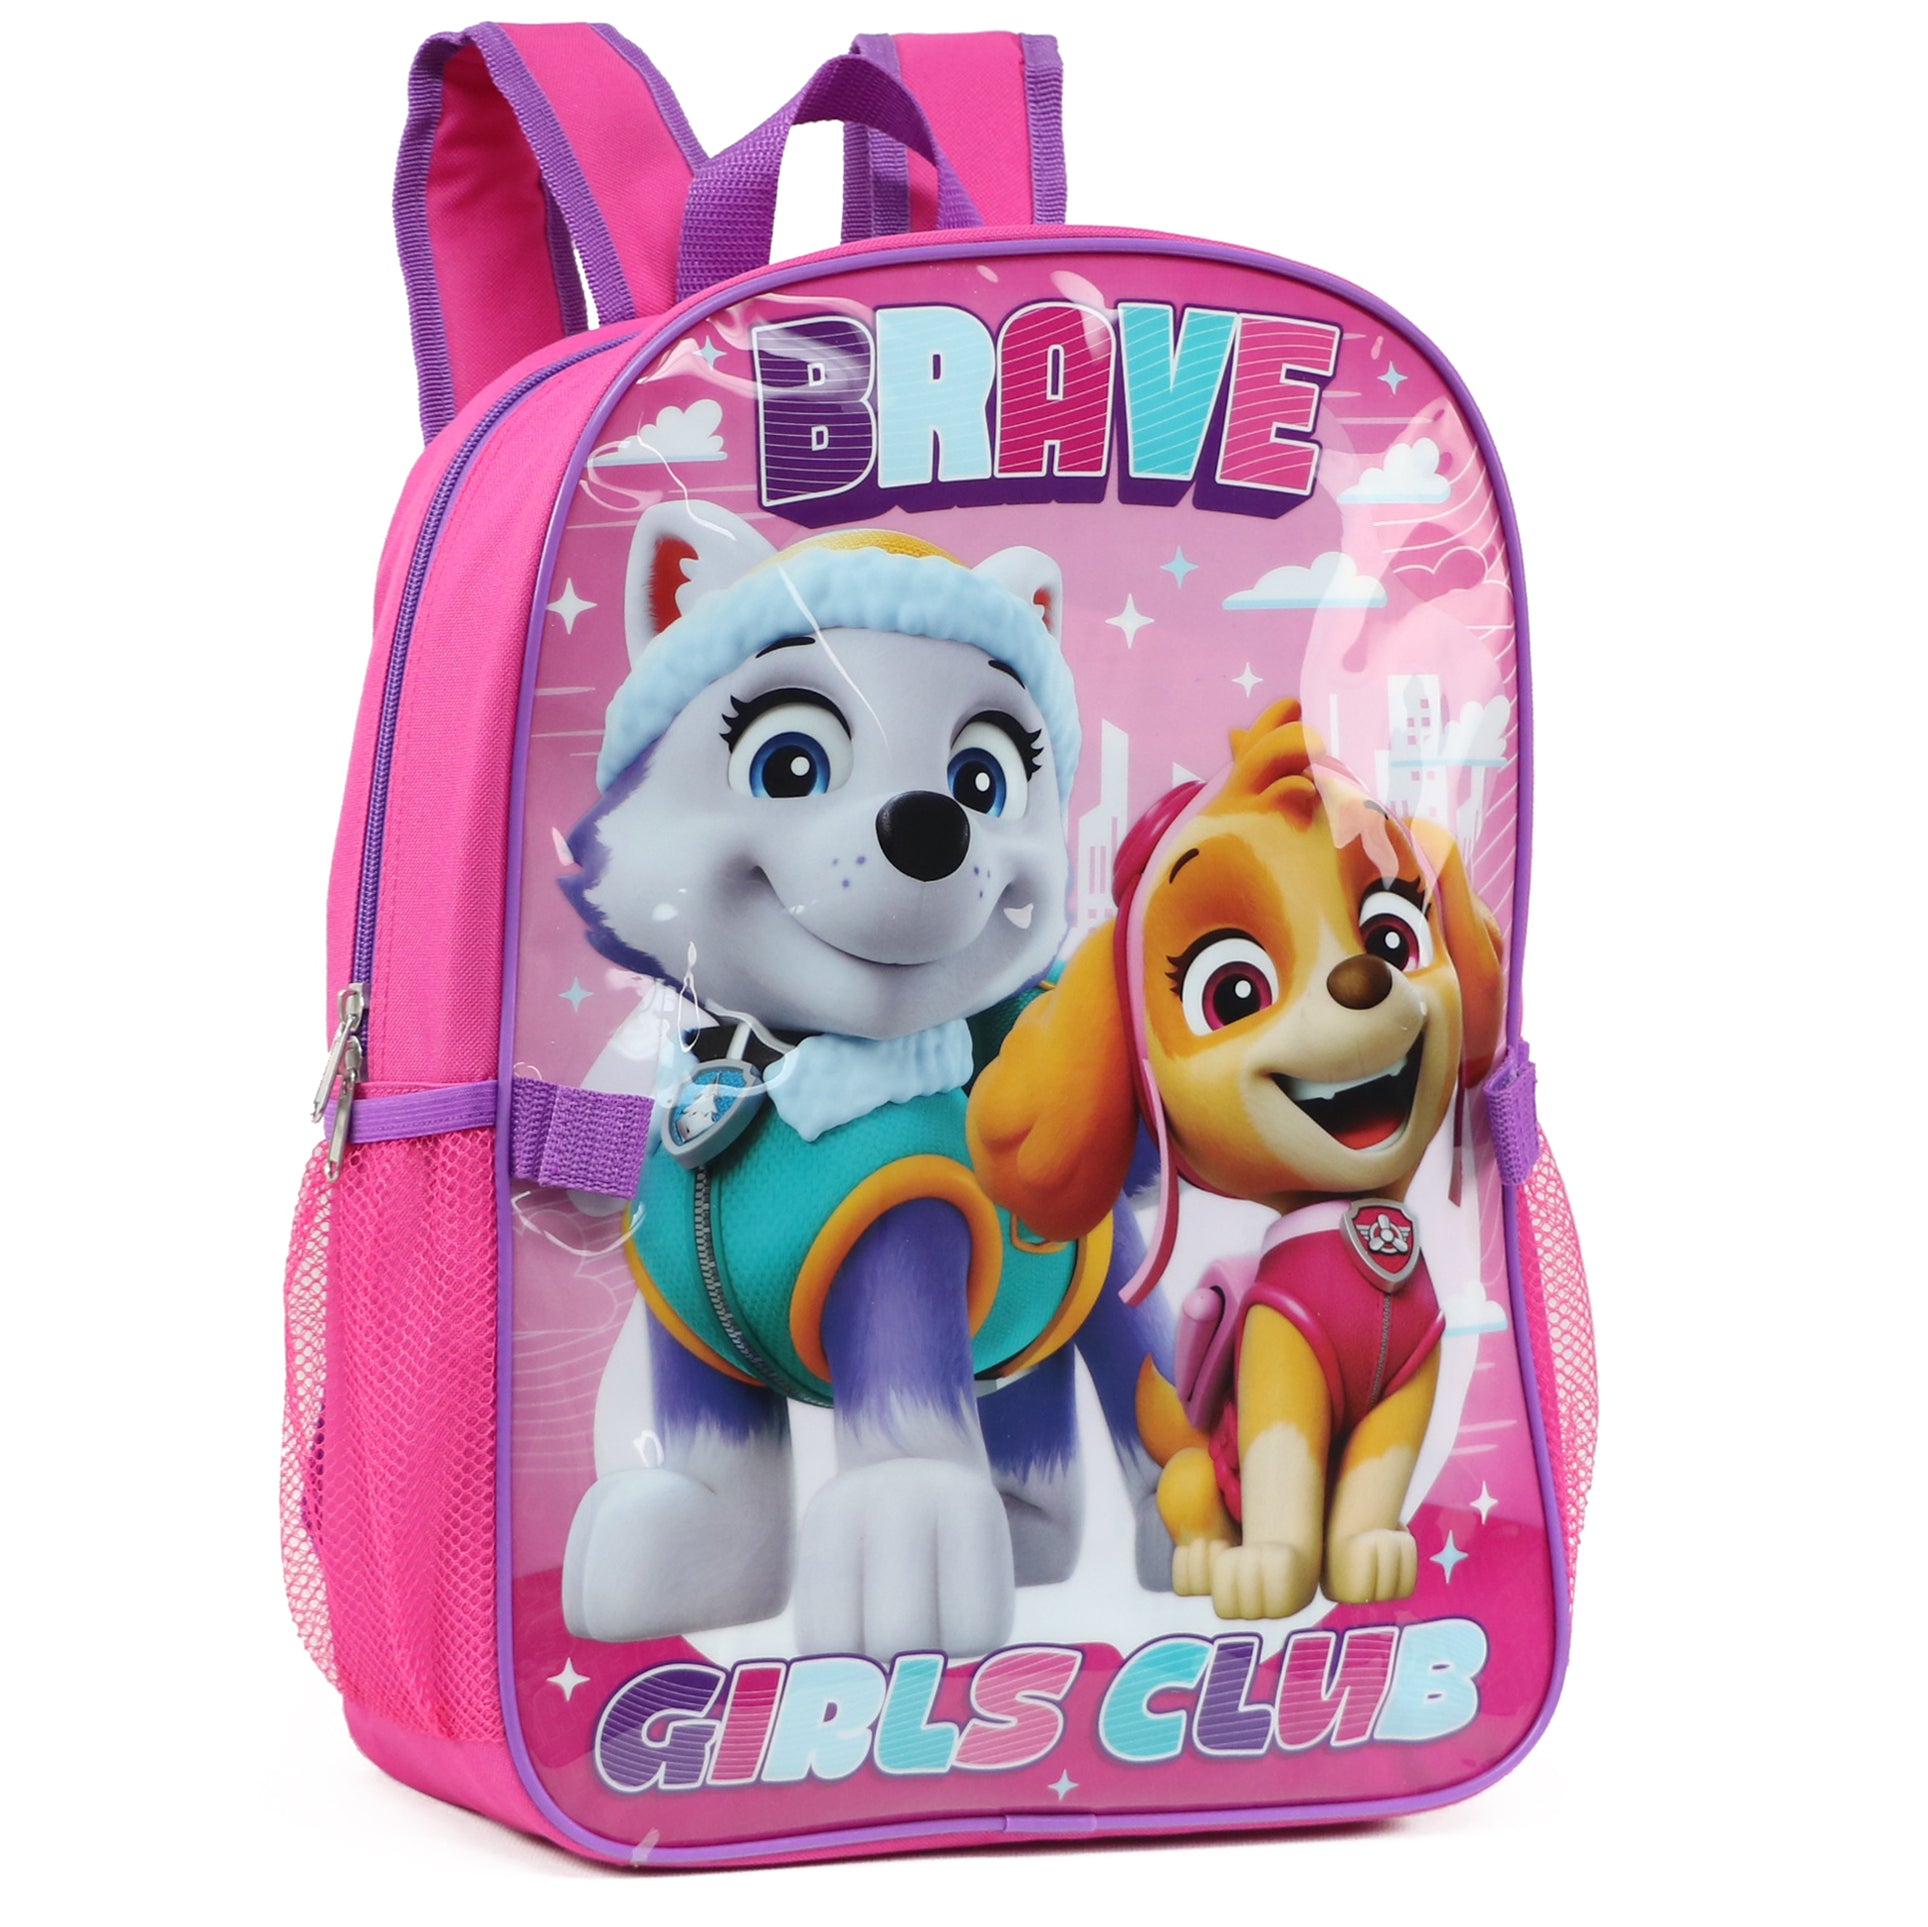 Nick Shop Paw Patrol Backpack and Lunch Bag for Boys Girls Kids -- 7 Pc  Bundle with 16'' Paw Patrol School Backpack Bag, Lunch Box, Water Bottle,  and